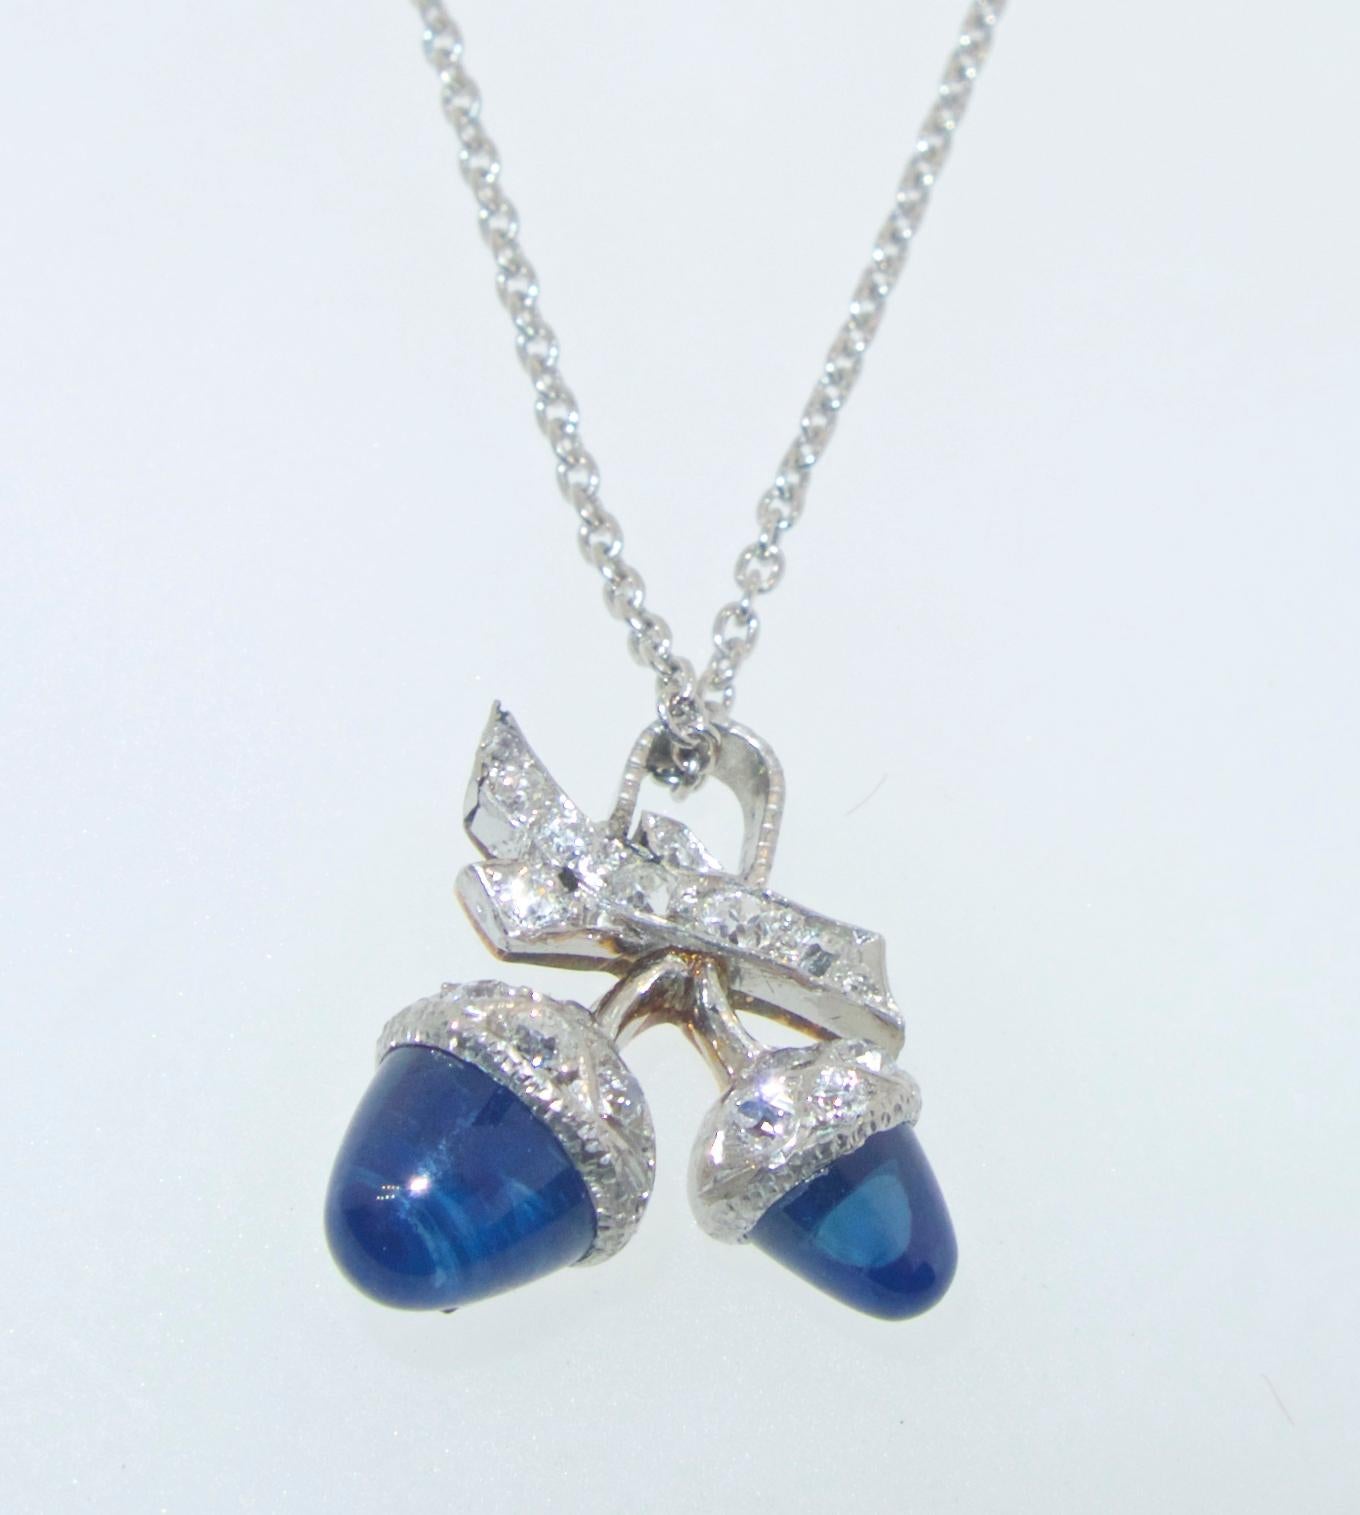 Sapphires and diamonds set in platinum and gold in a petite floral and leaf motif.  This charming piece can be either a pendant or a charm.  Made in the first quarter of the 20th century, the sapphires are a deep pure blue and the diamonds add a